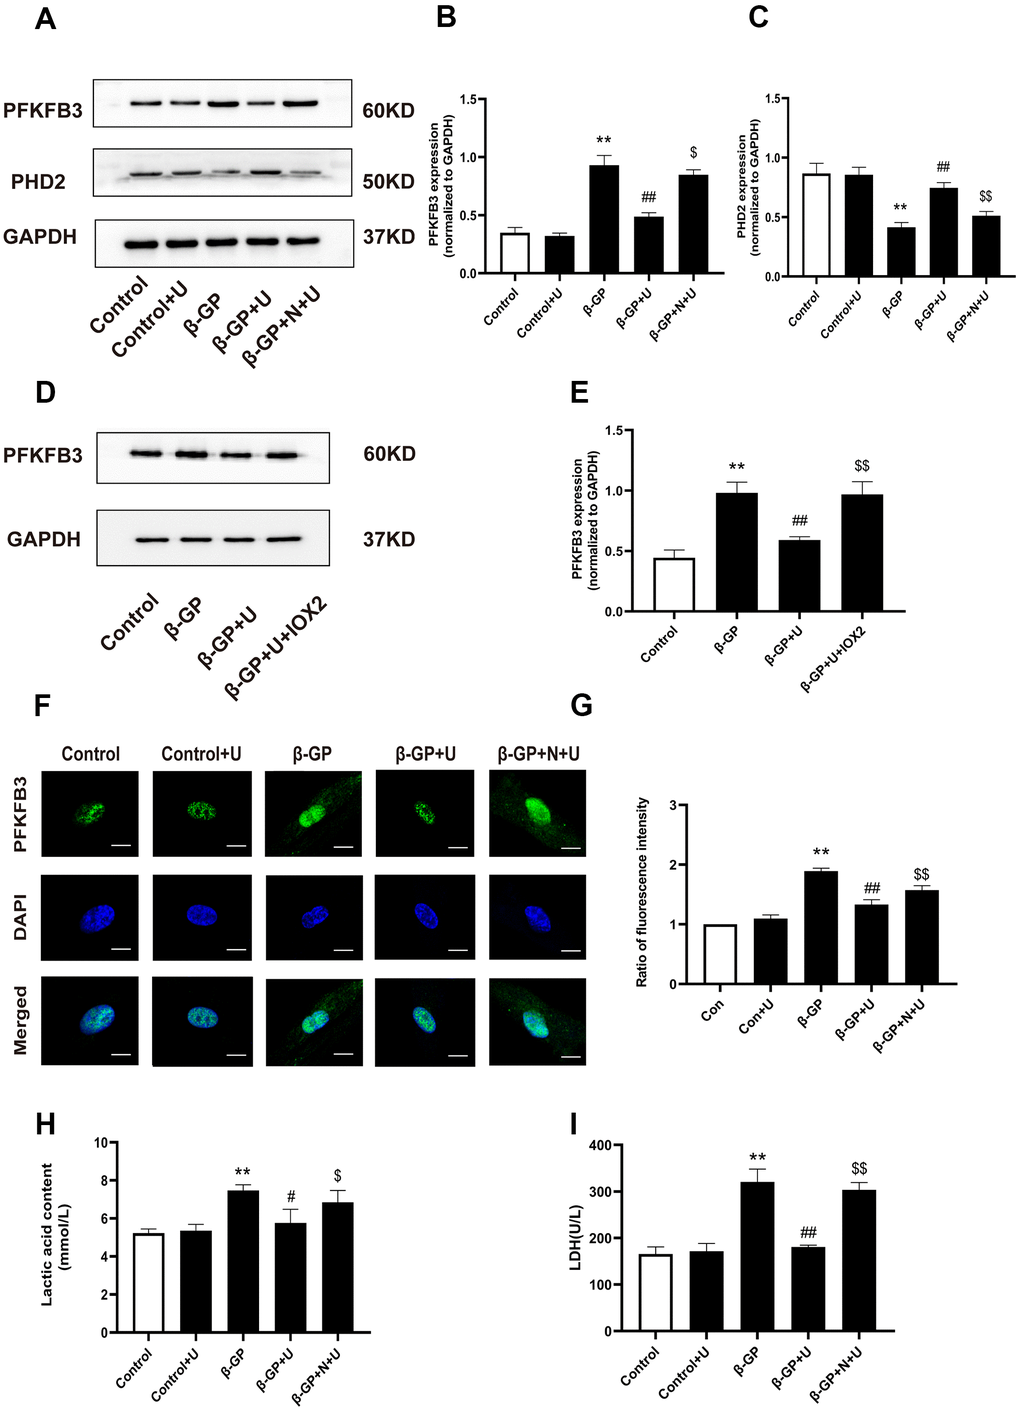 Effects of κ-OR stimulation on the expression of PFKFB3, PHD2, and glycolysis products in VSMCs treated with β-GP. (A) Representative blot images of PFKFB3 and PHD2. (B) Quantitative analysis of PFKFB3 protein expression using densitometry. (C) Quantitative analysis of PHD2 protein expression using densitometry. (D) Representative blot images of PFKFB3. (E) Quantitative analysis of PFKFB3 protein expression using densitometry. (F) After various treatments, PFKFB3 nuclear translocation was evaluated via immunofluorescence using confocal microscopy. At least 10-15 cells per condition were imaged. Scale bar = 10μm. (G) Quantification of PFKFB3 immunofluorescence intensity. (H, I) Lactic acid content and LDH levels were detected. U, U50,488H; β-GP, β-Glycerophosphate disodium salt pentahydrate; N, nor-BNI; Data obtained from quantitative densitometry were presented as means ± SEM. n=5 in each group. **P #P ##P $P $$P 